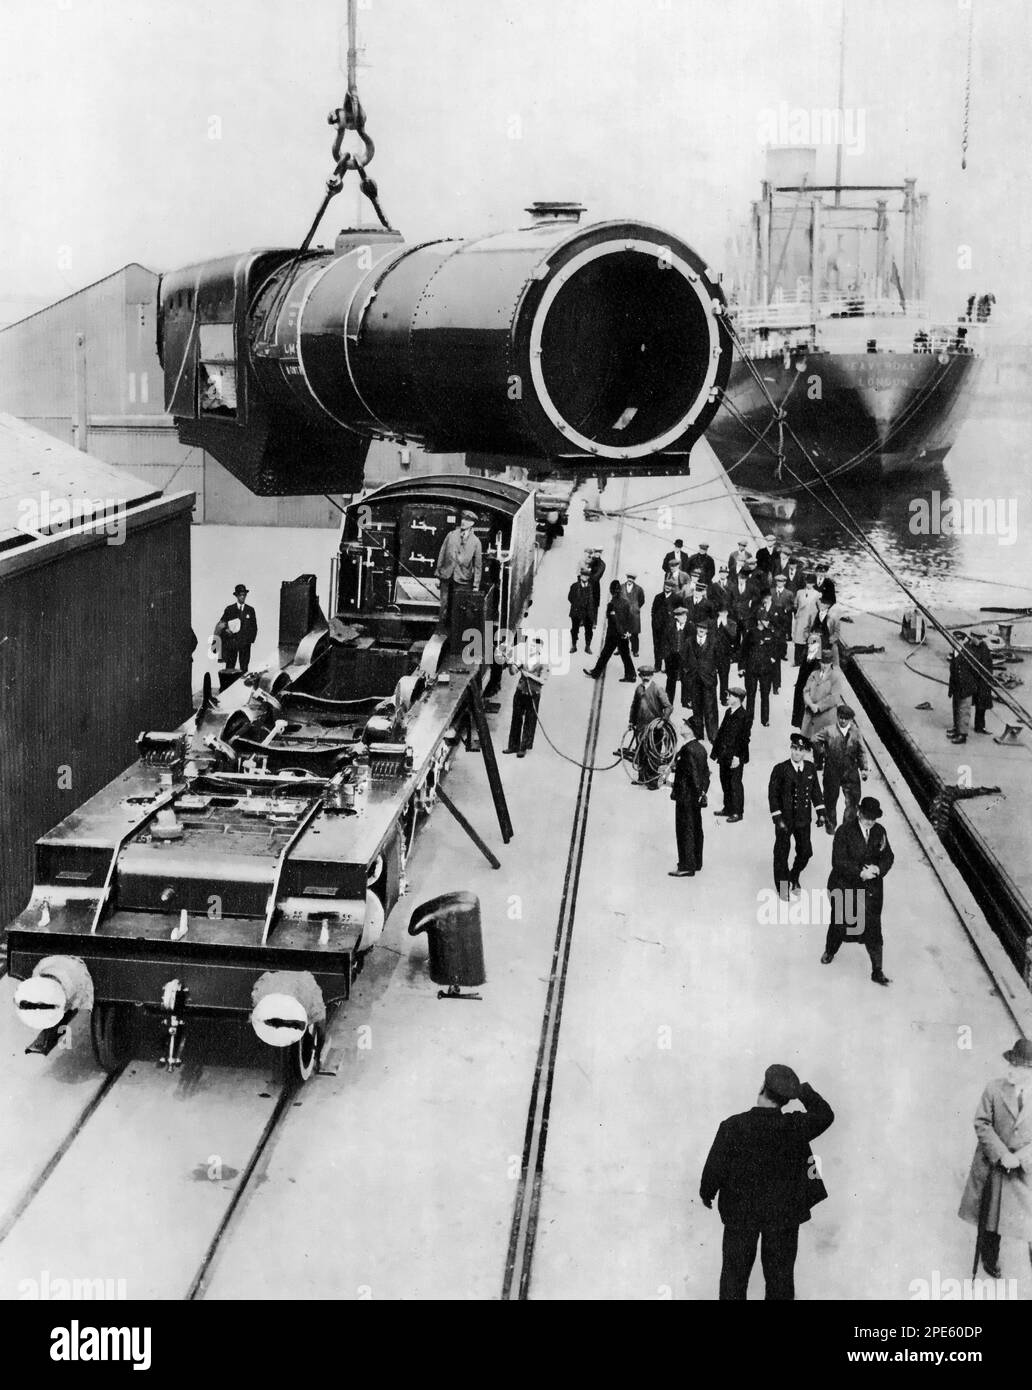 6100 The Royal Scot being dismantled at Tilbury before being transported to the Century of Progress International Exposition, Chicago, USA, 1933. The London, Midland and Scottish Railway (LMS) locomotive was shipped to the event by the Canadian Pacific owned SS Beaverdale. Stock Photo